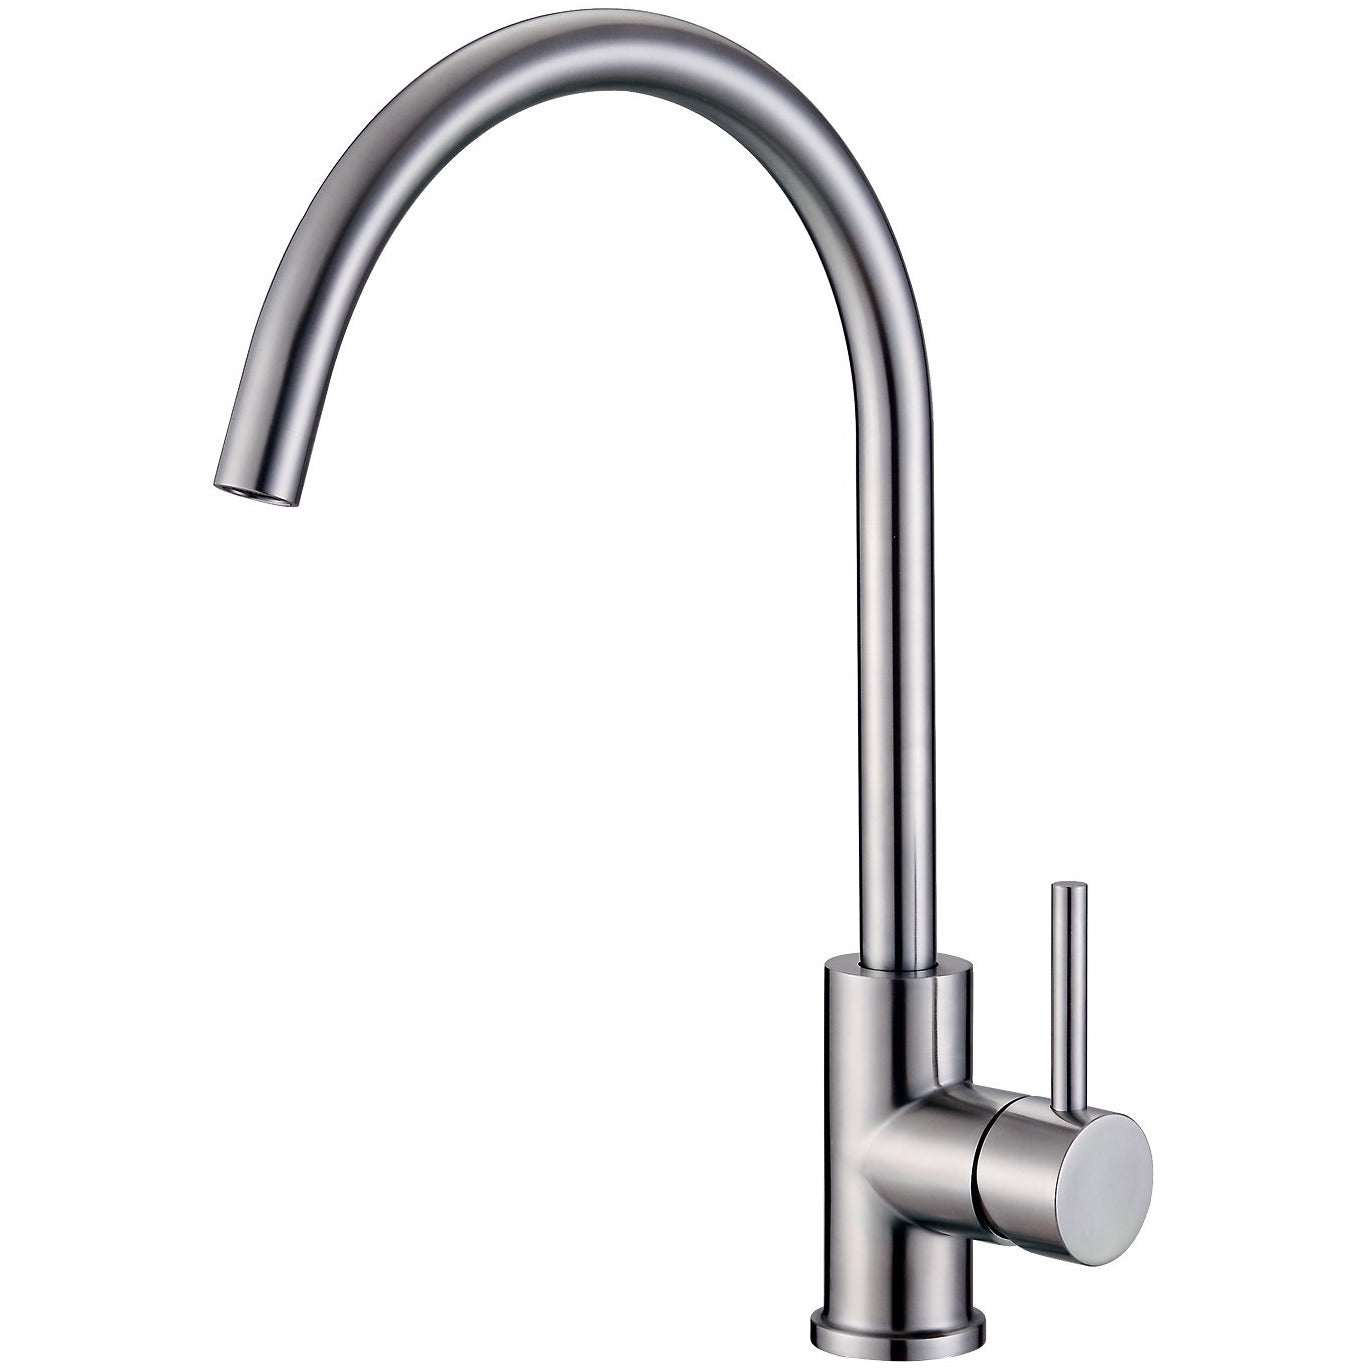 Cosmos Round Single Hole Bar, Kitchen or Bathroom Vessel Sink Faucet